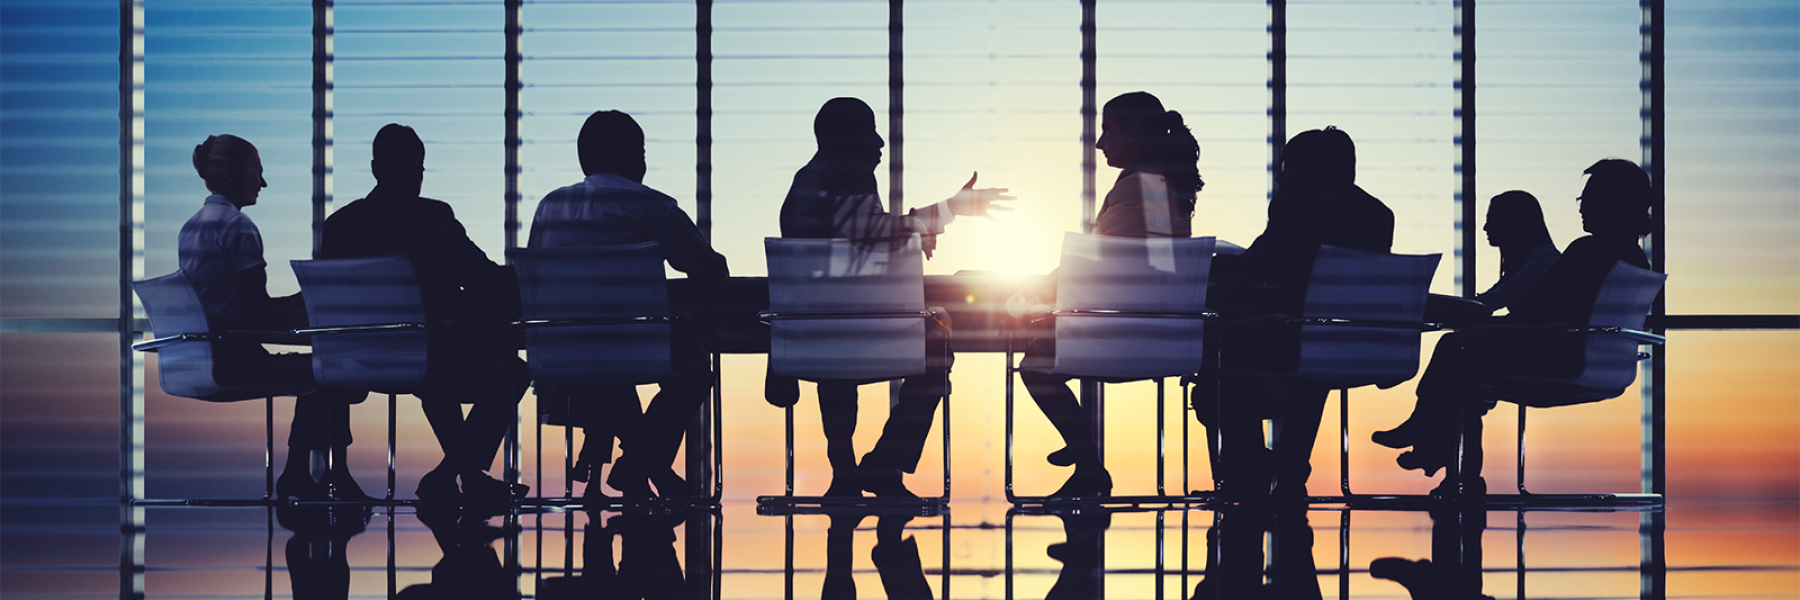 Silhouette of group of people around a table having a business meeting